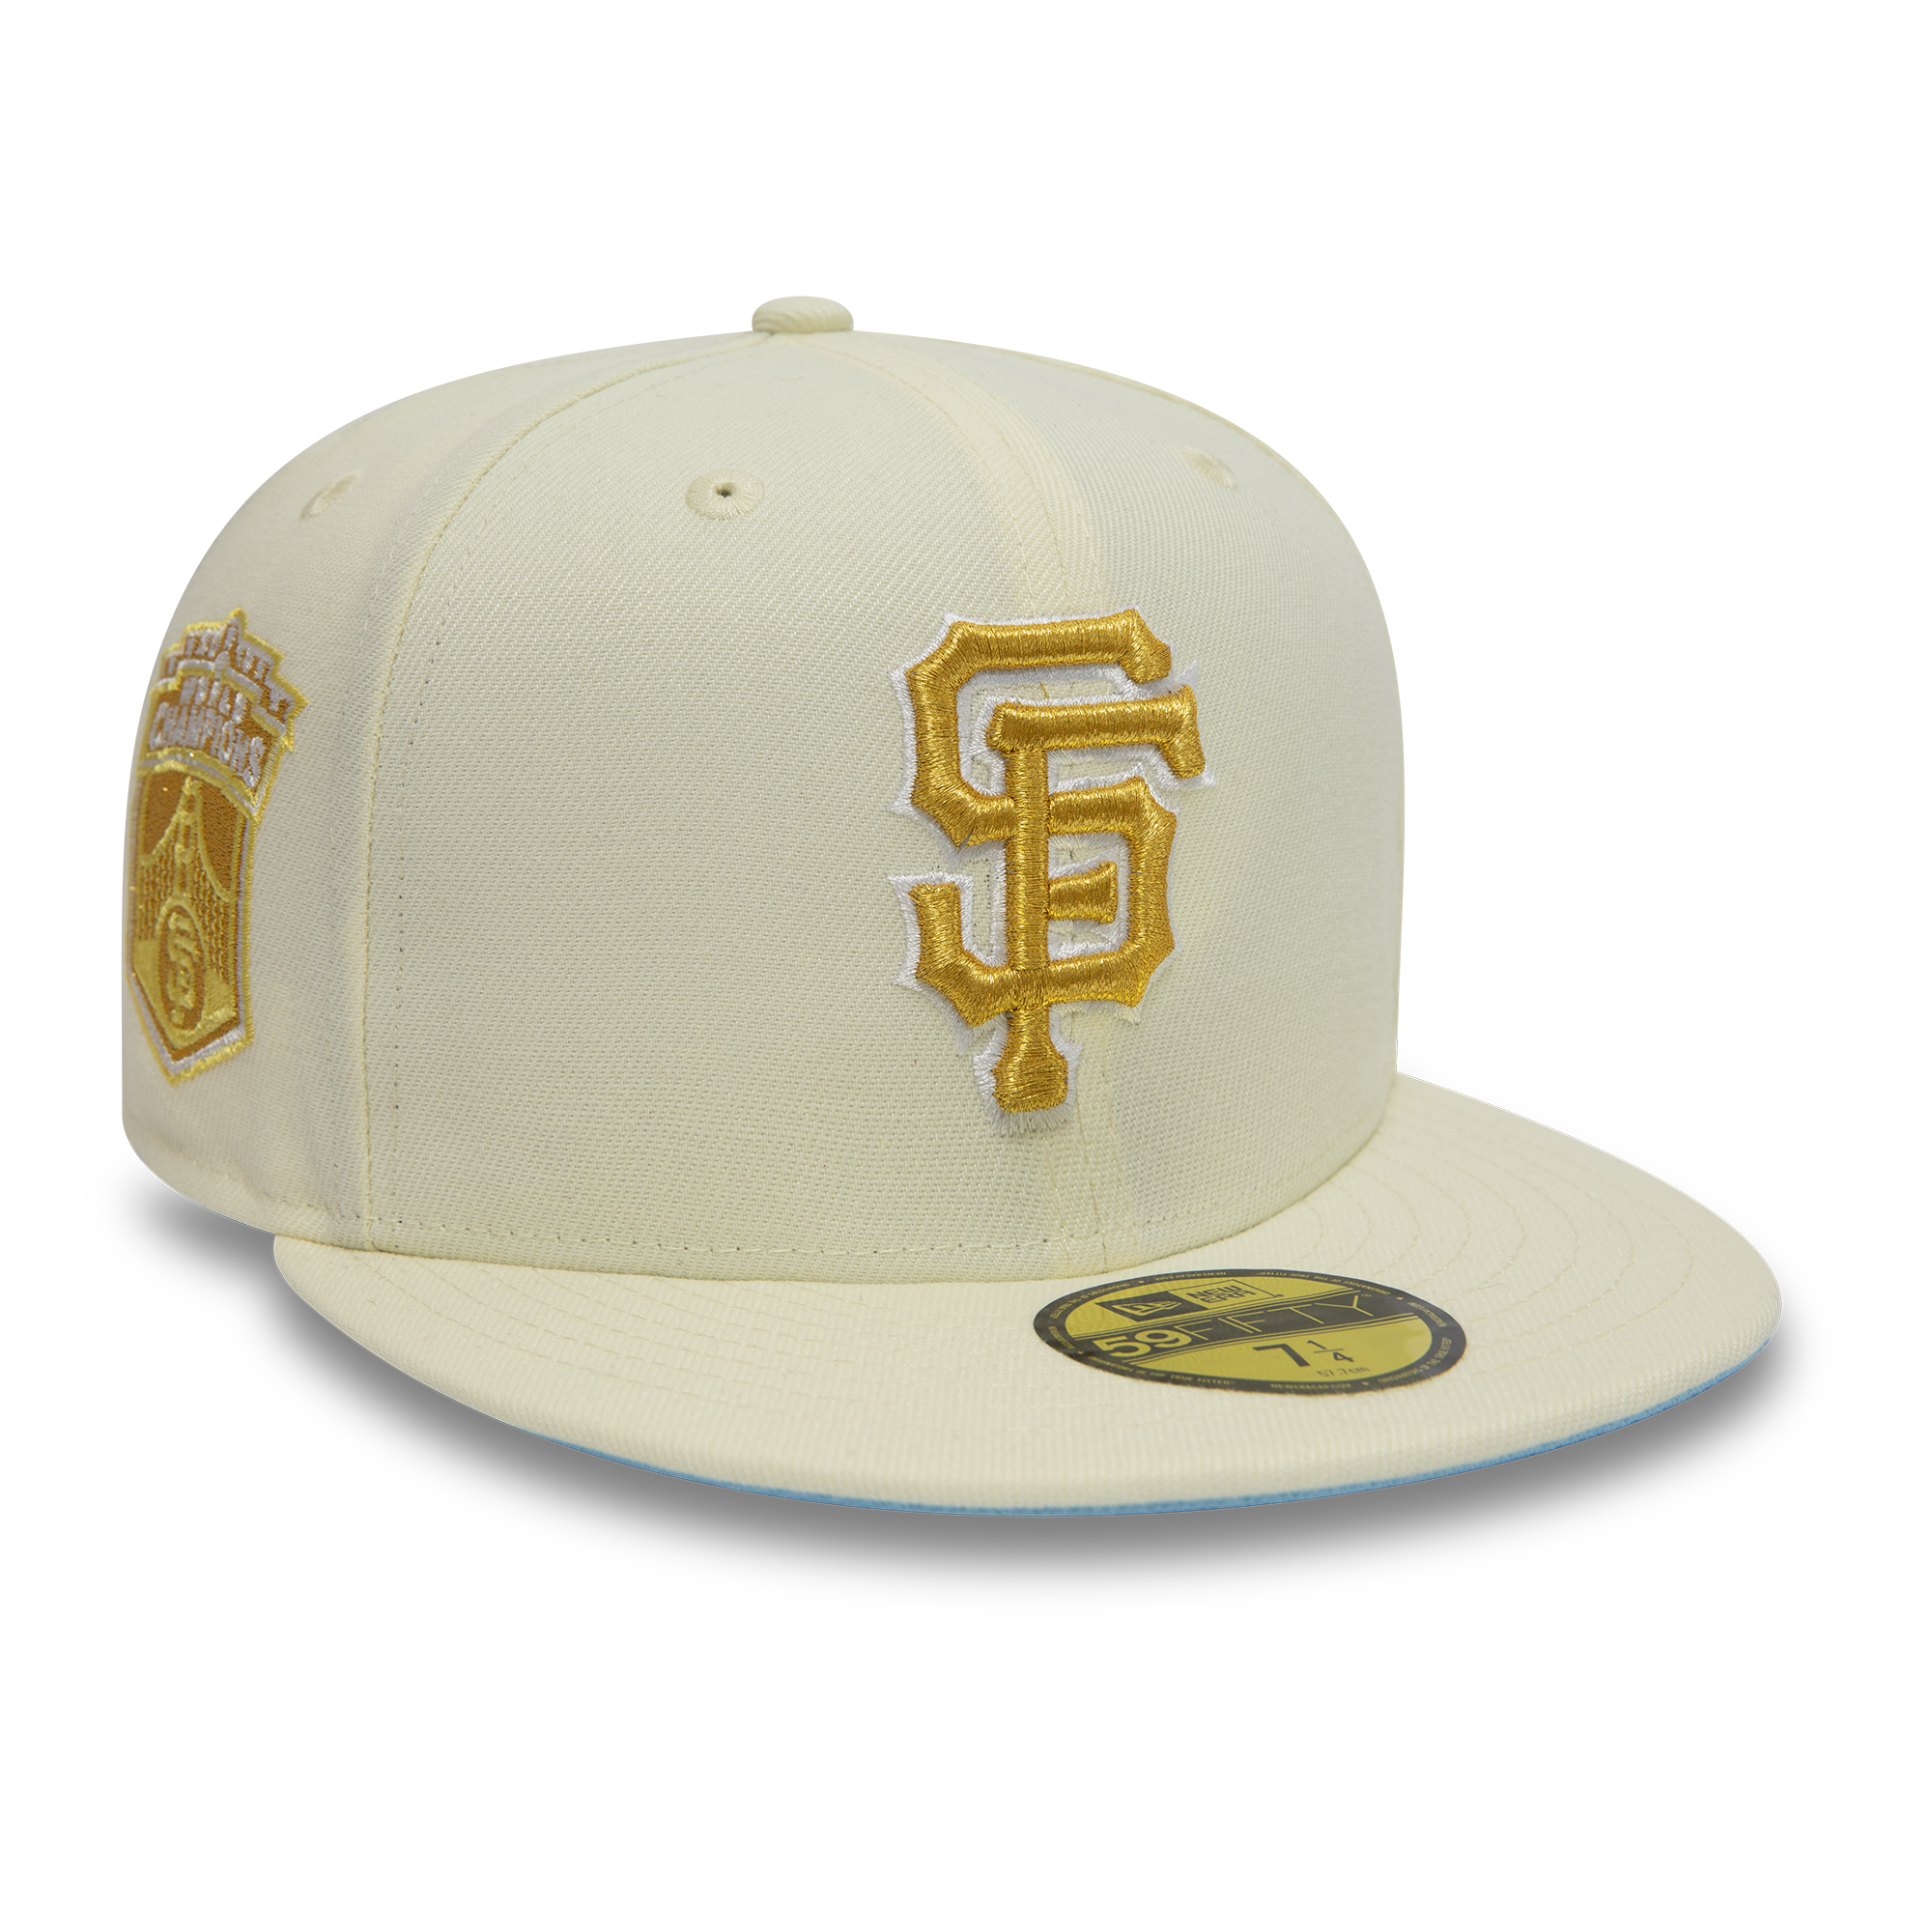 Cappellino 59FIFTY Fitted San Francisco Giants 2010 World Champions Bianco